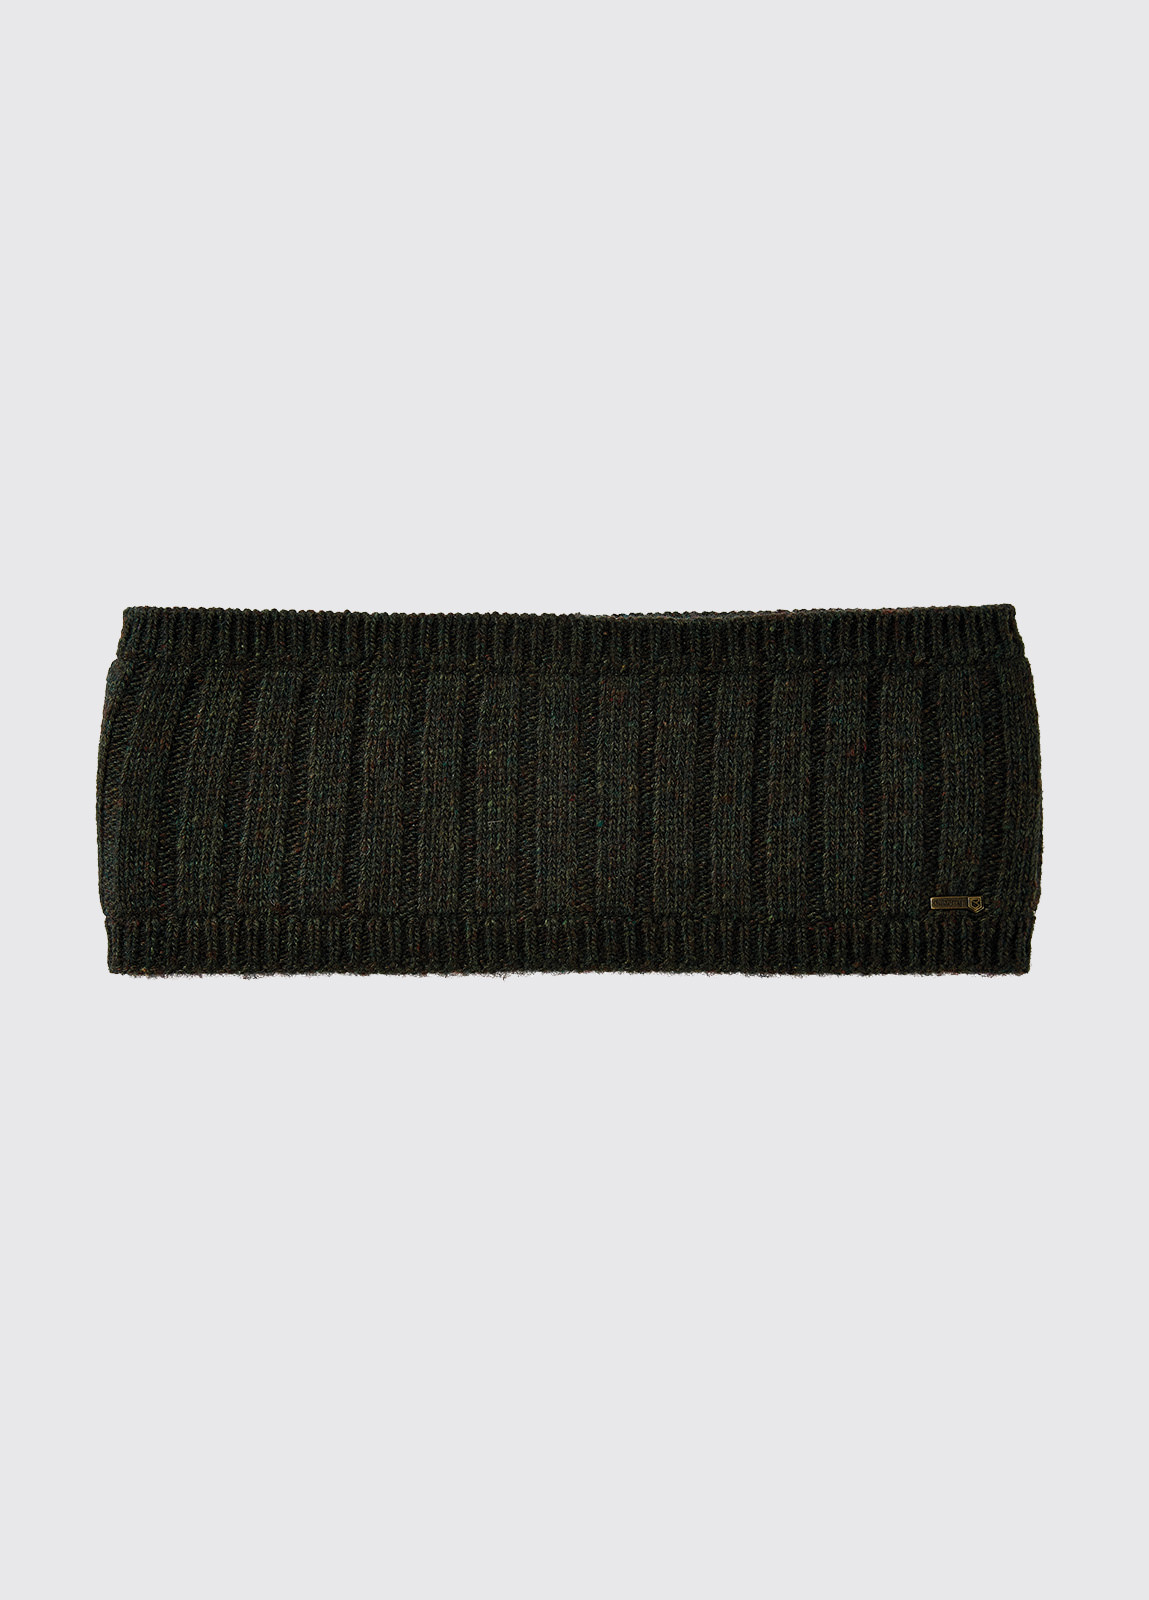 Mohill Knitted Headband - Olive